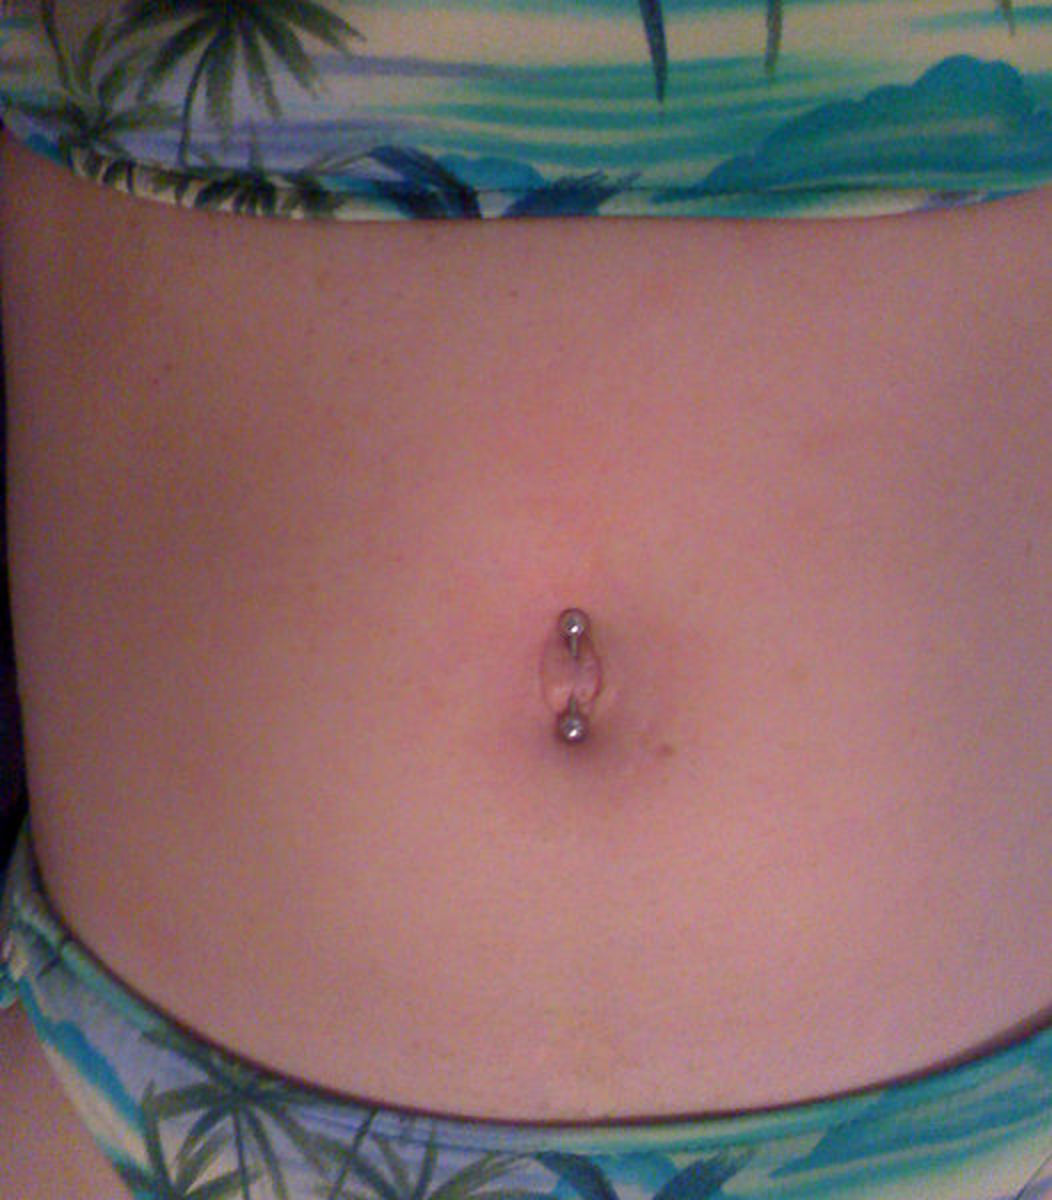 navel-piercing-risks-aftercare-infections-pain